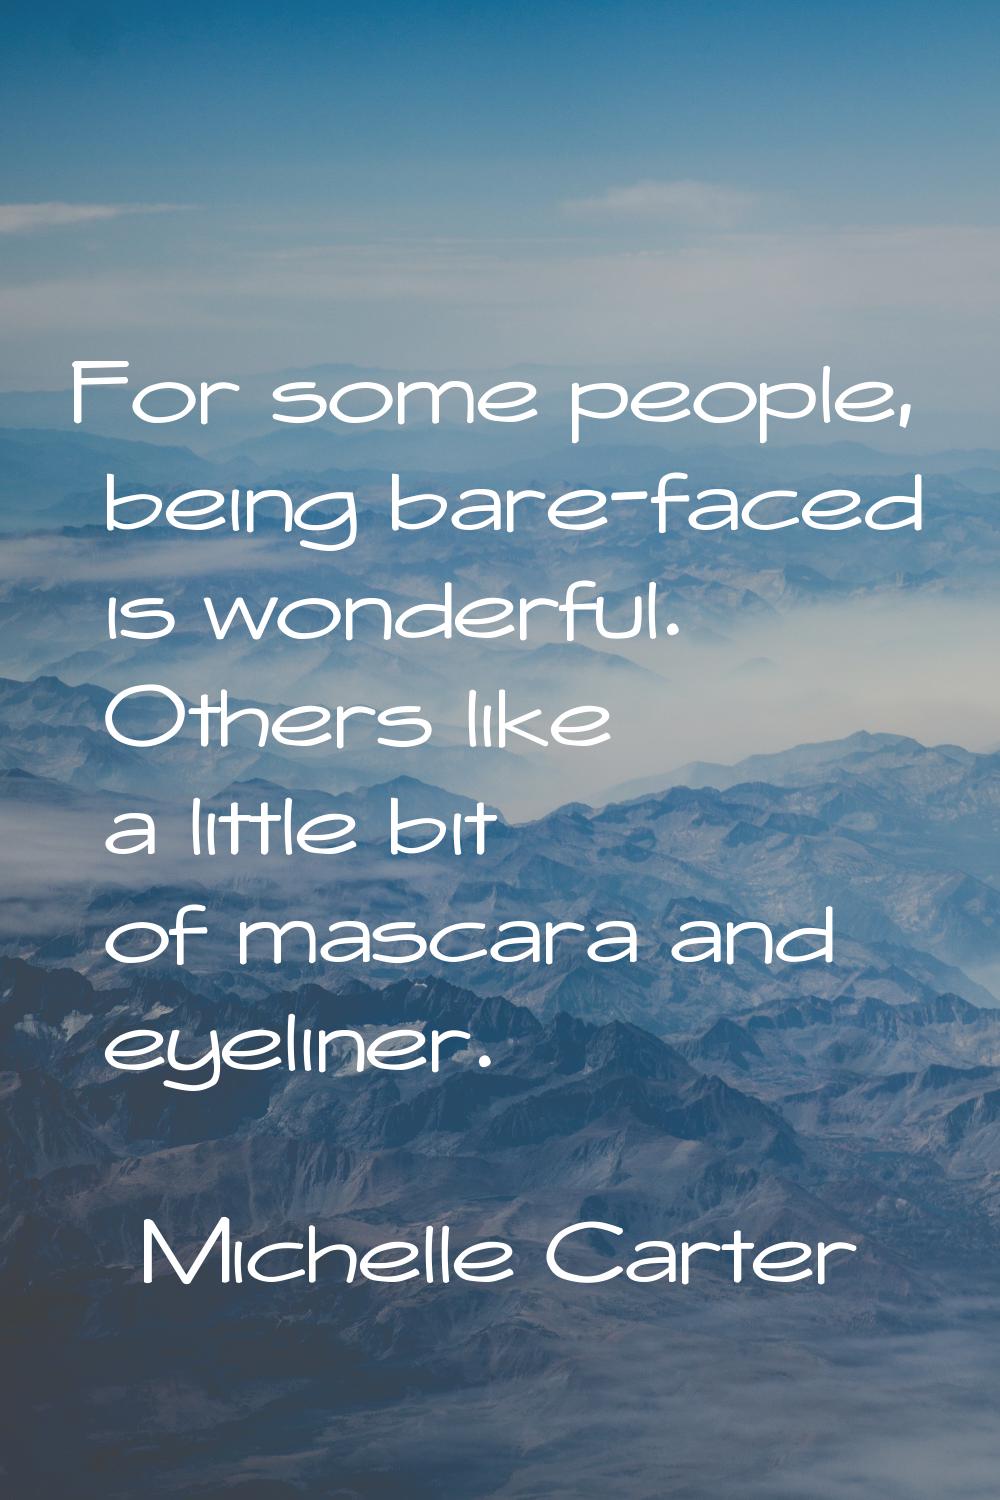 For some people, being bare-faced is wonderful. Others like a little bit of mascara and eyeliner.